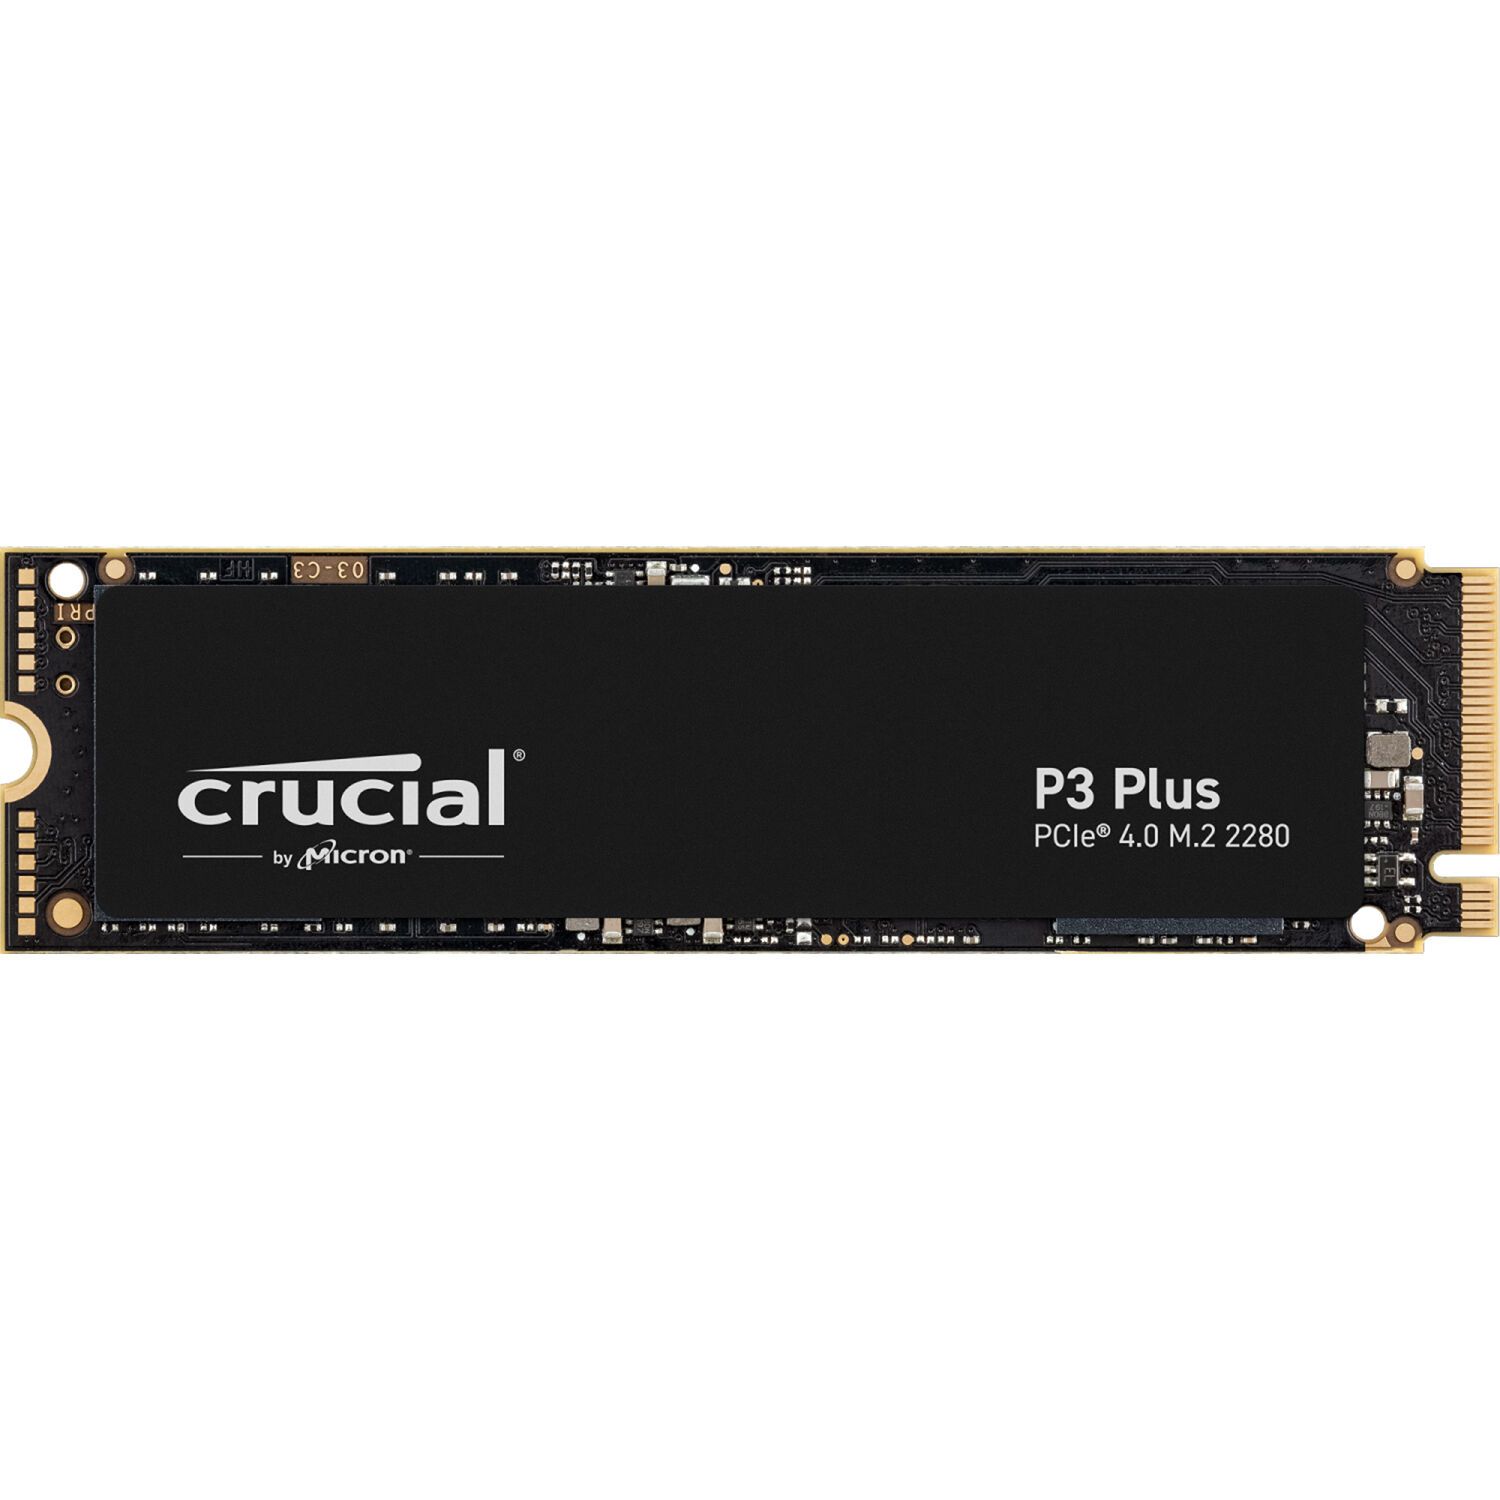 Crucial SSD P3 Plus 1000GB/1TB M.2 2280 PCIE Gen4.0 3D NAND, R/W: 5000/4200 MB/s, Storage Executive + Acronis SW included_1